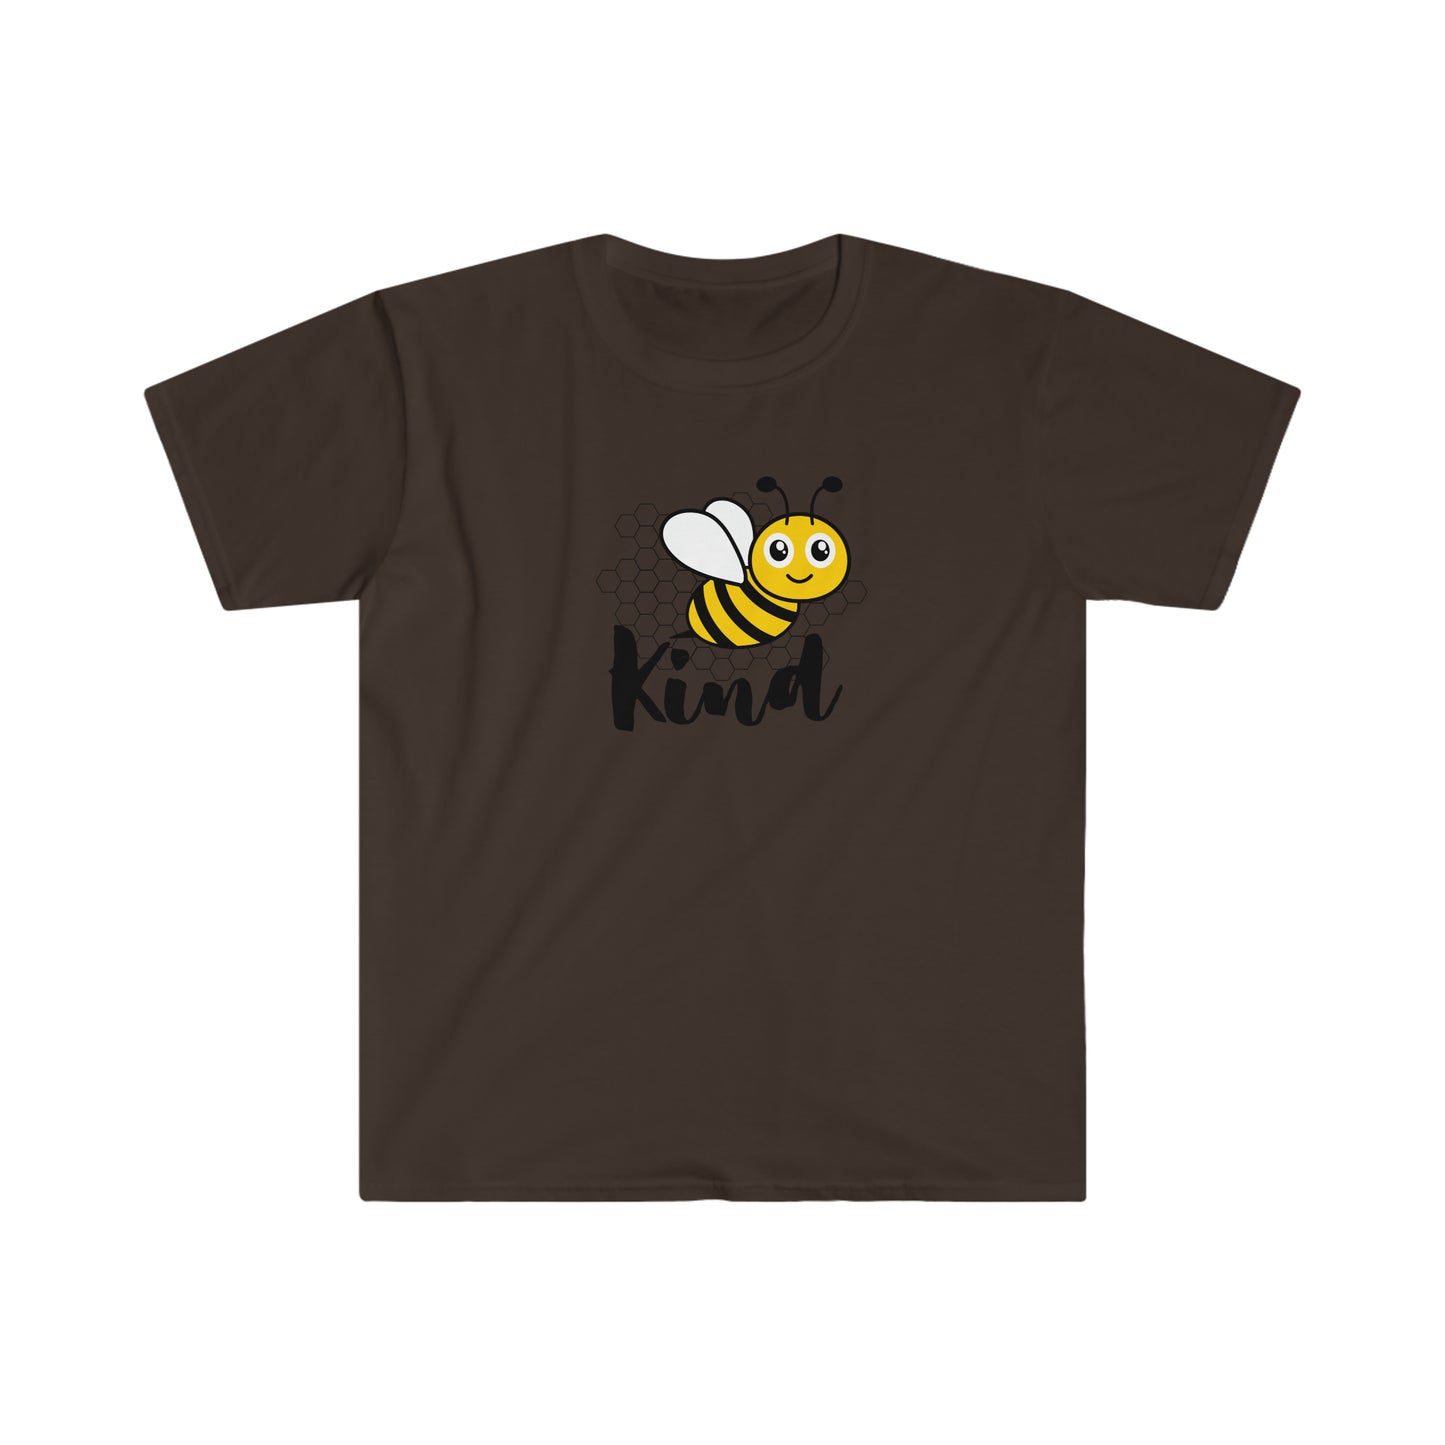 Bee Kind - Unisex Softstyle T-Shirt